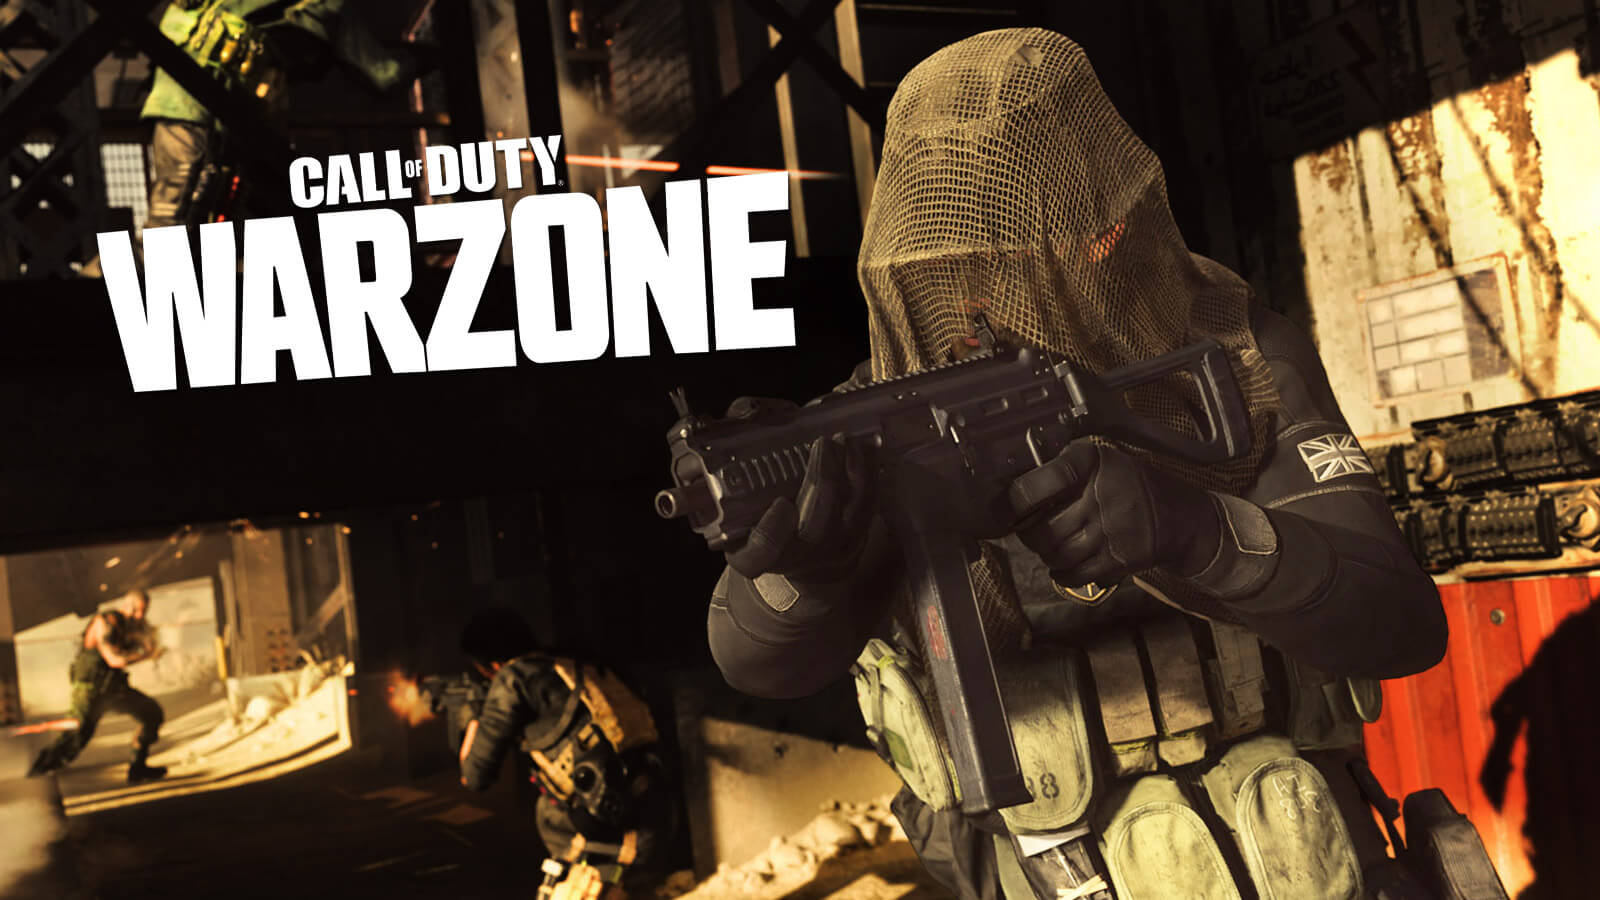 Релиз call of duty warzone mobile. Call of Duty Warzone. Call of Duty Warzone 2. Call of Duty Warzone 2 стрим. Варзоне Call of Duty.